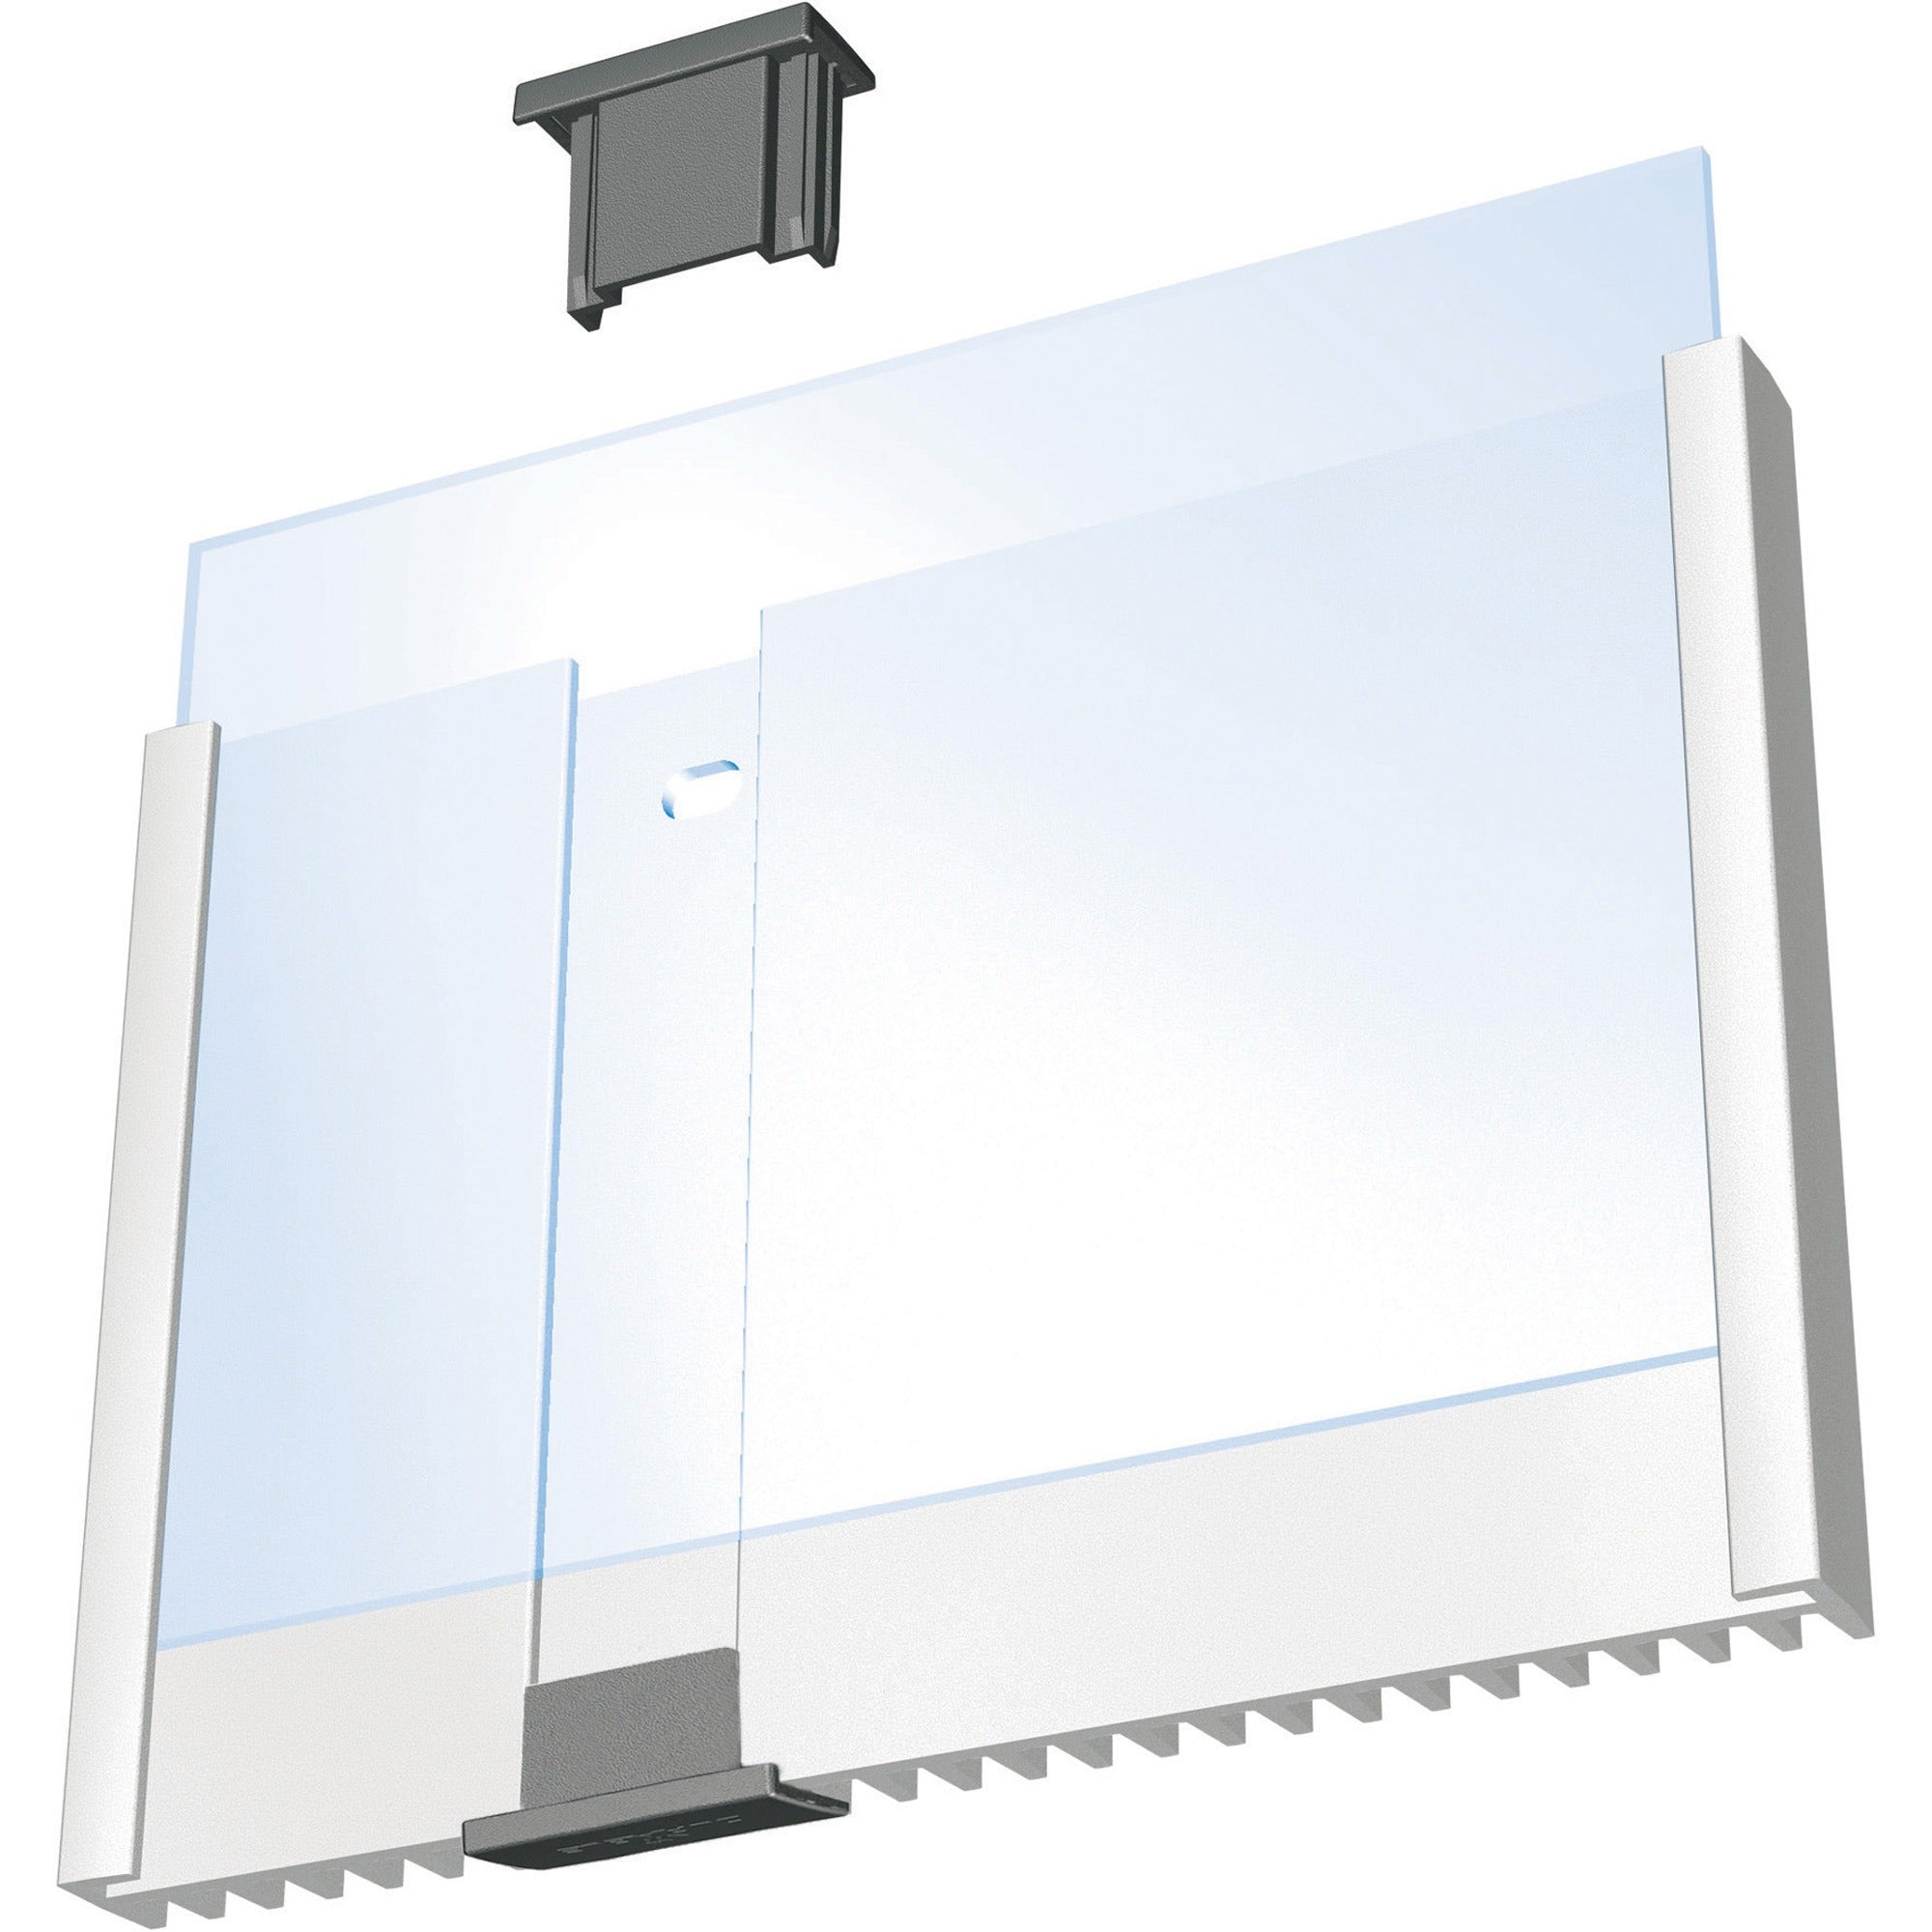 durable-wall-mounted-info-sign-6-1-8-x-4-3-8-rectangular-shape-acrylic-aluminum-easy-to-update-silver-1-pack_dbl480123 - 4